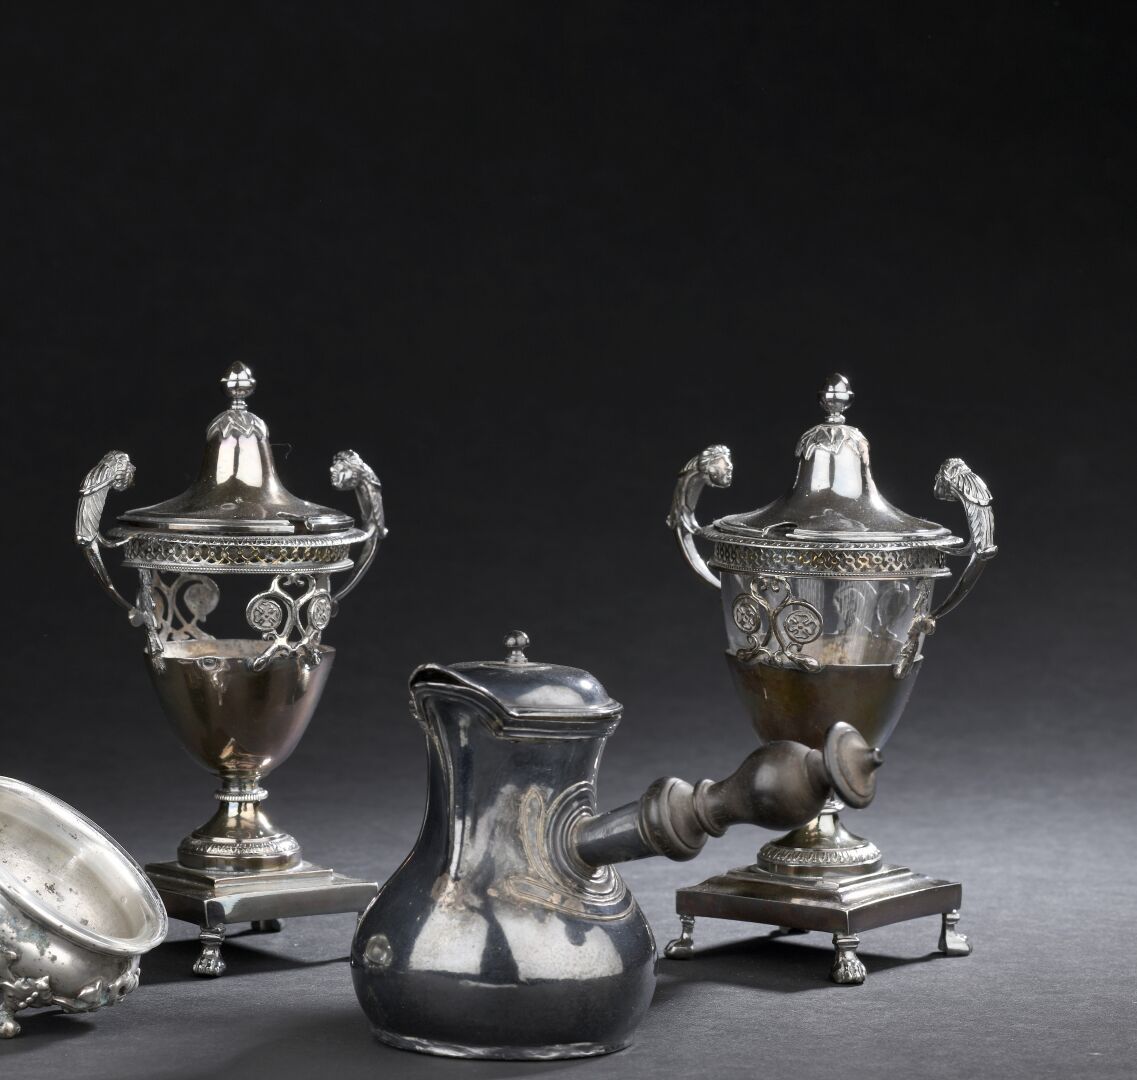 Null Pair of silver mustard pots by PVN 1798-1809
In the form of vase with handl&hellip;